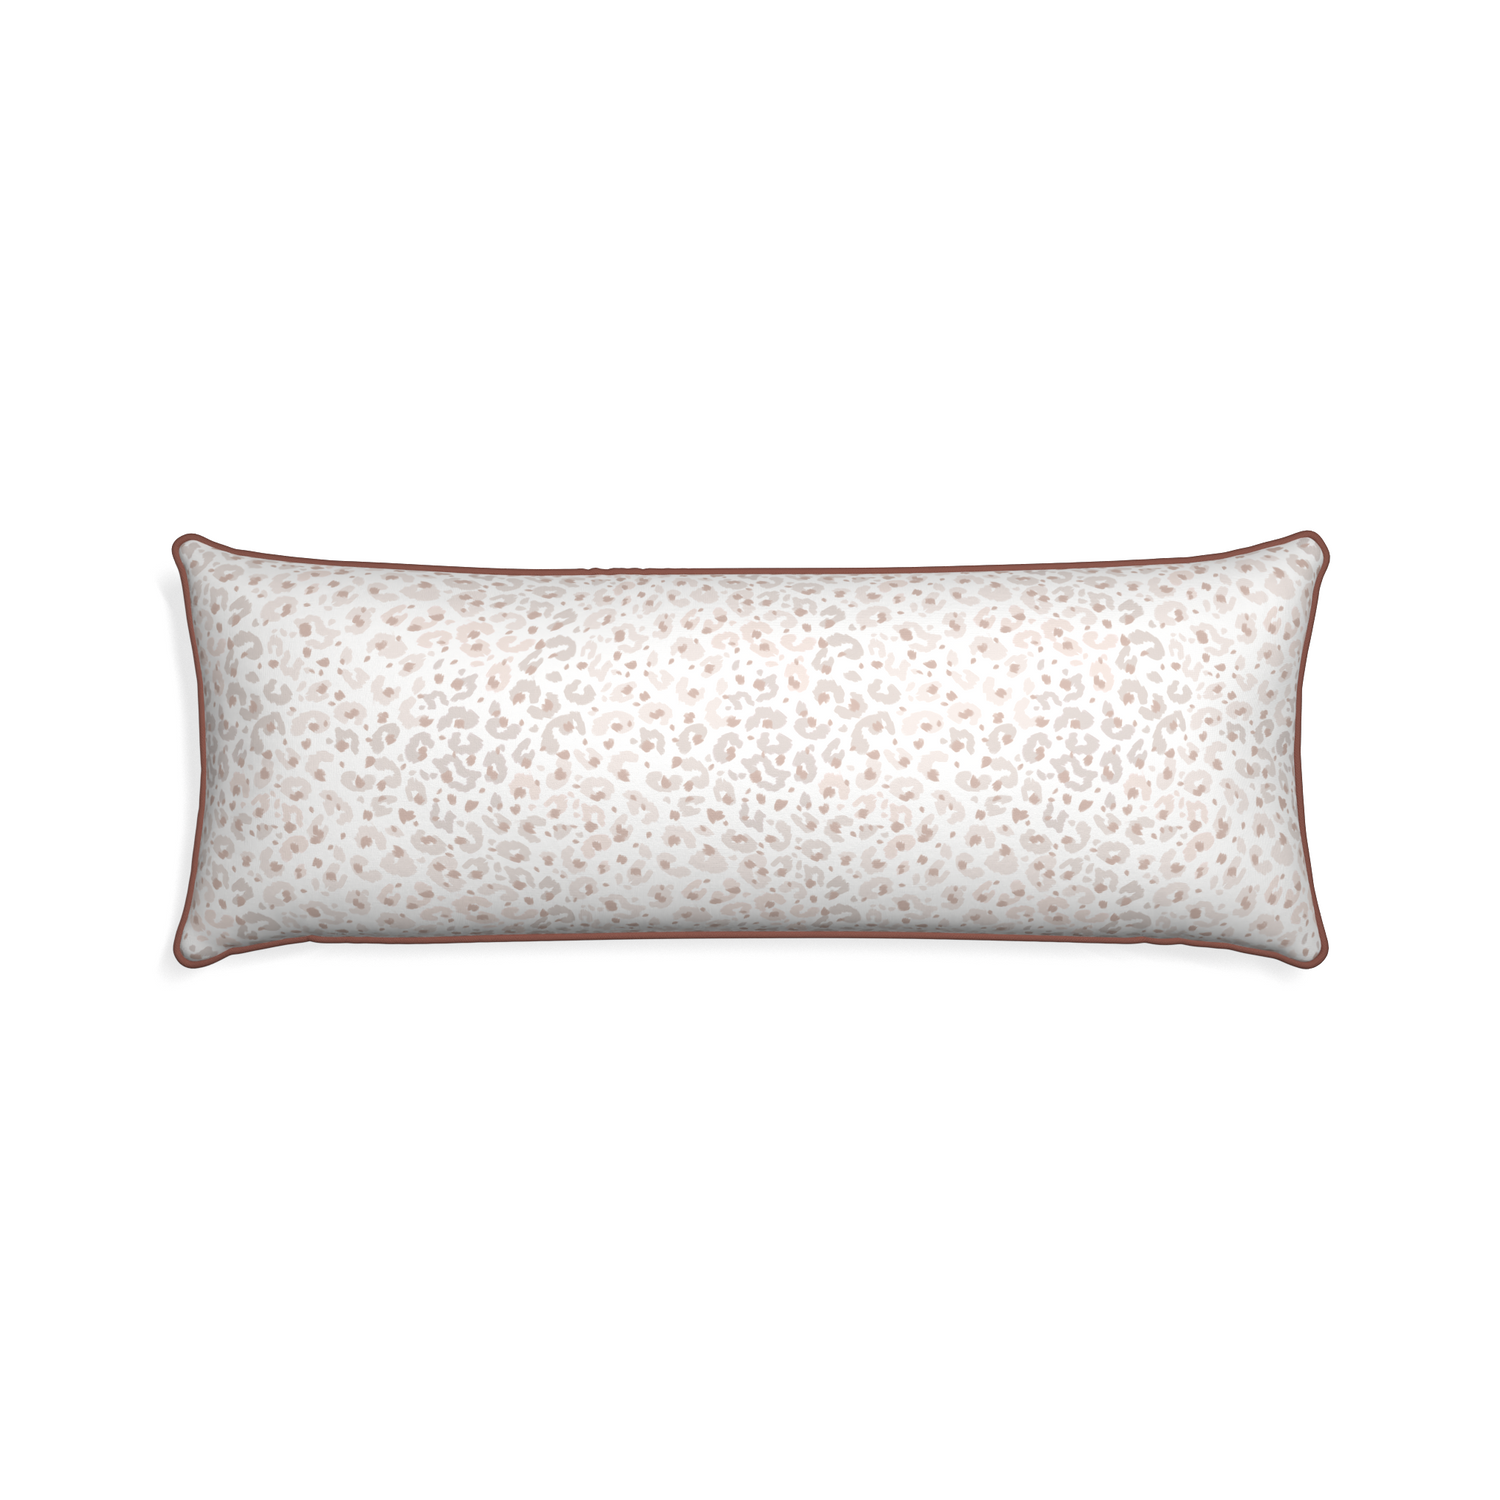 Xl-lumbar rosie custom beige animal printpillow with w piping on white background